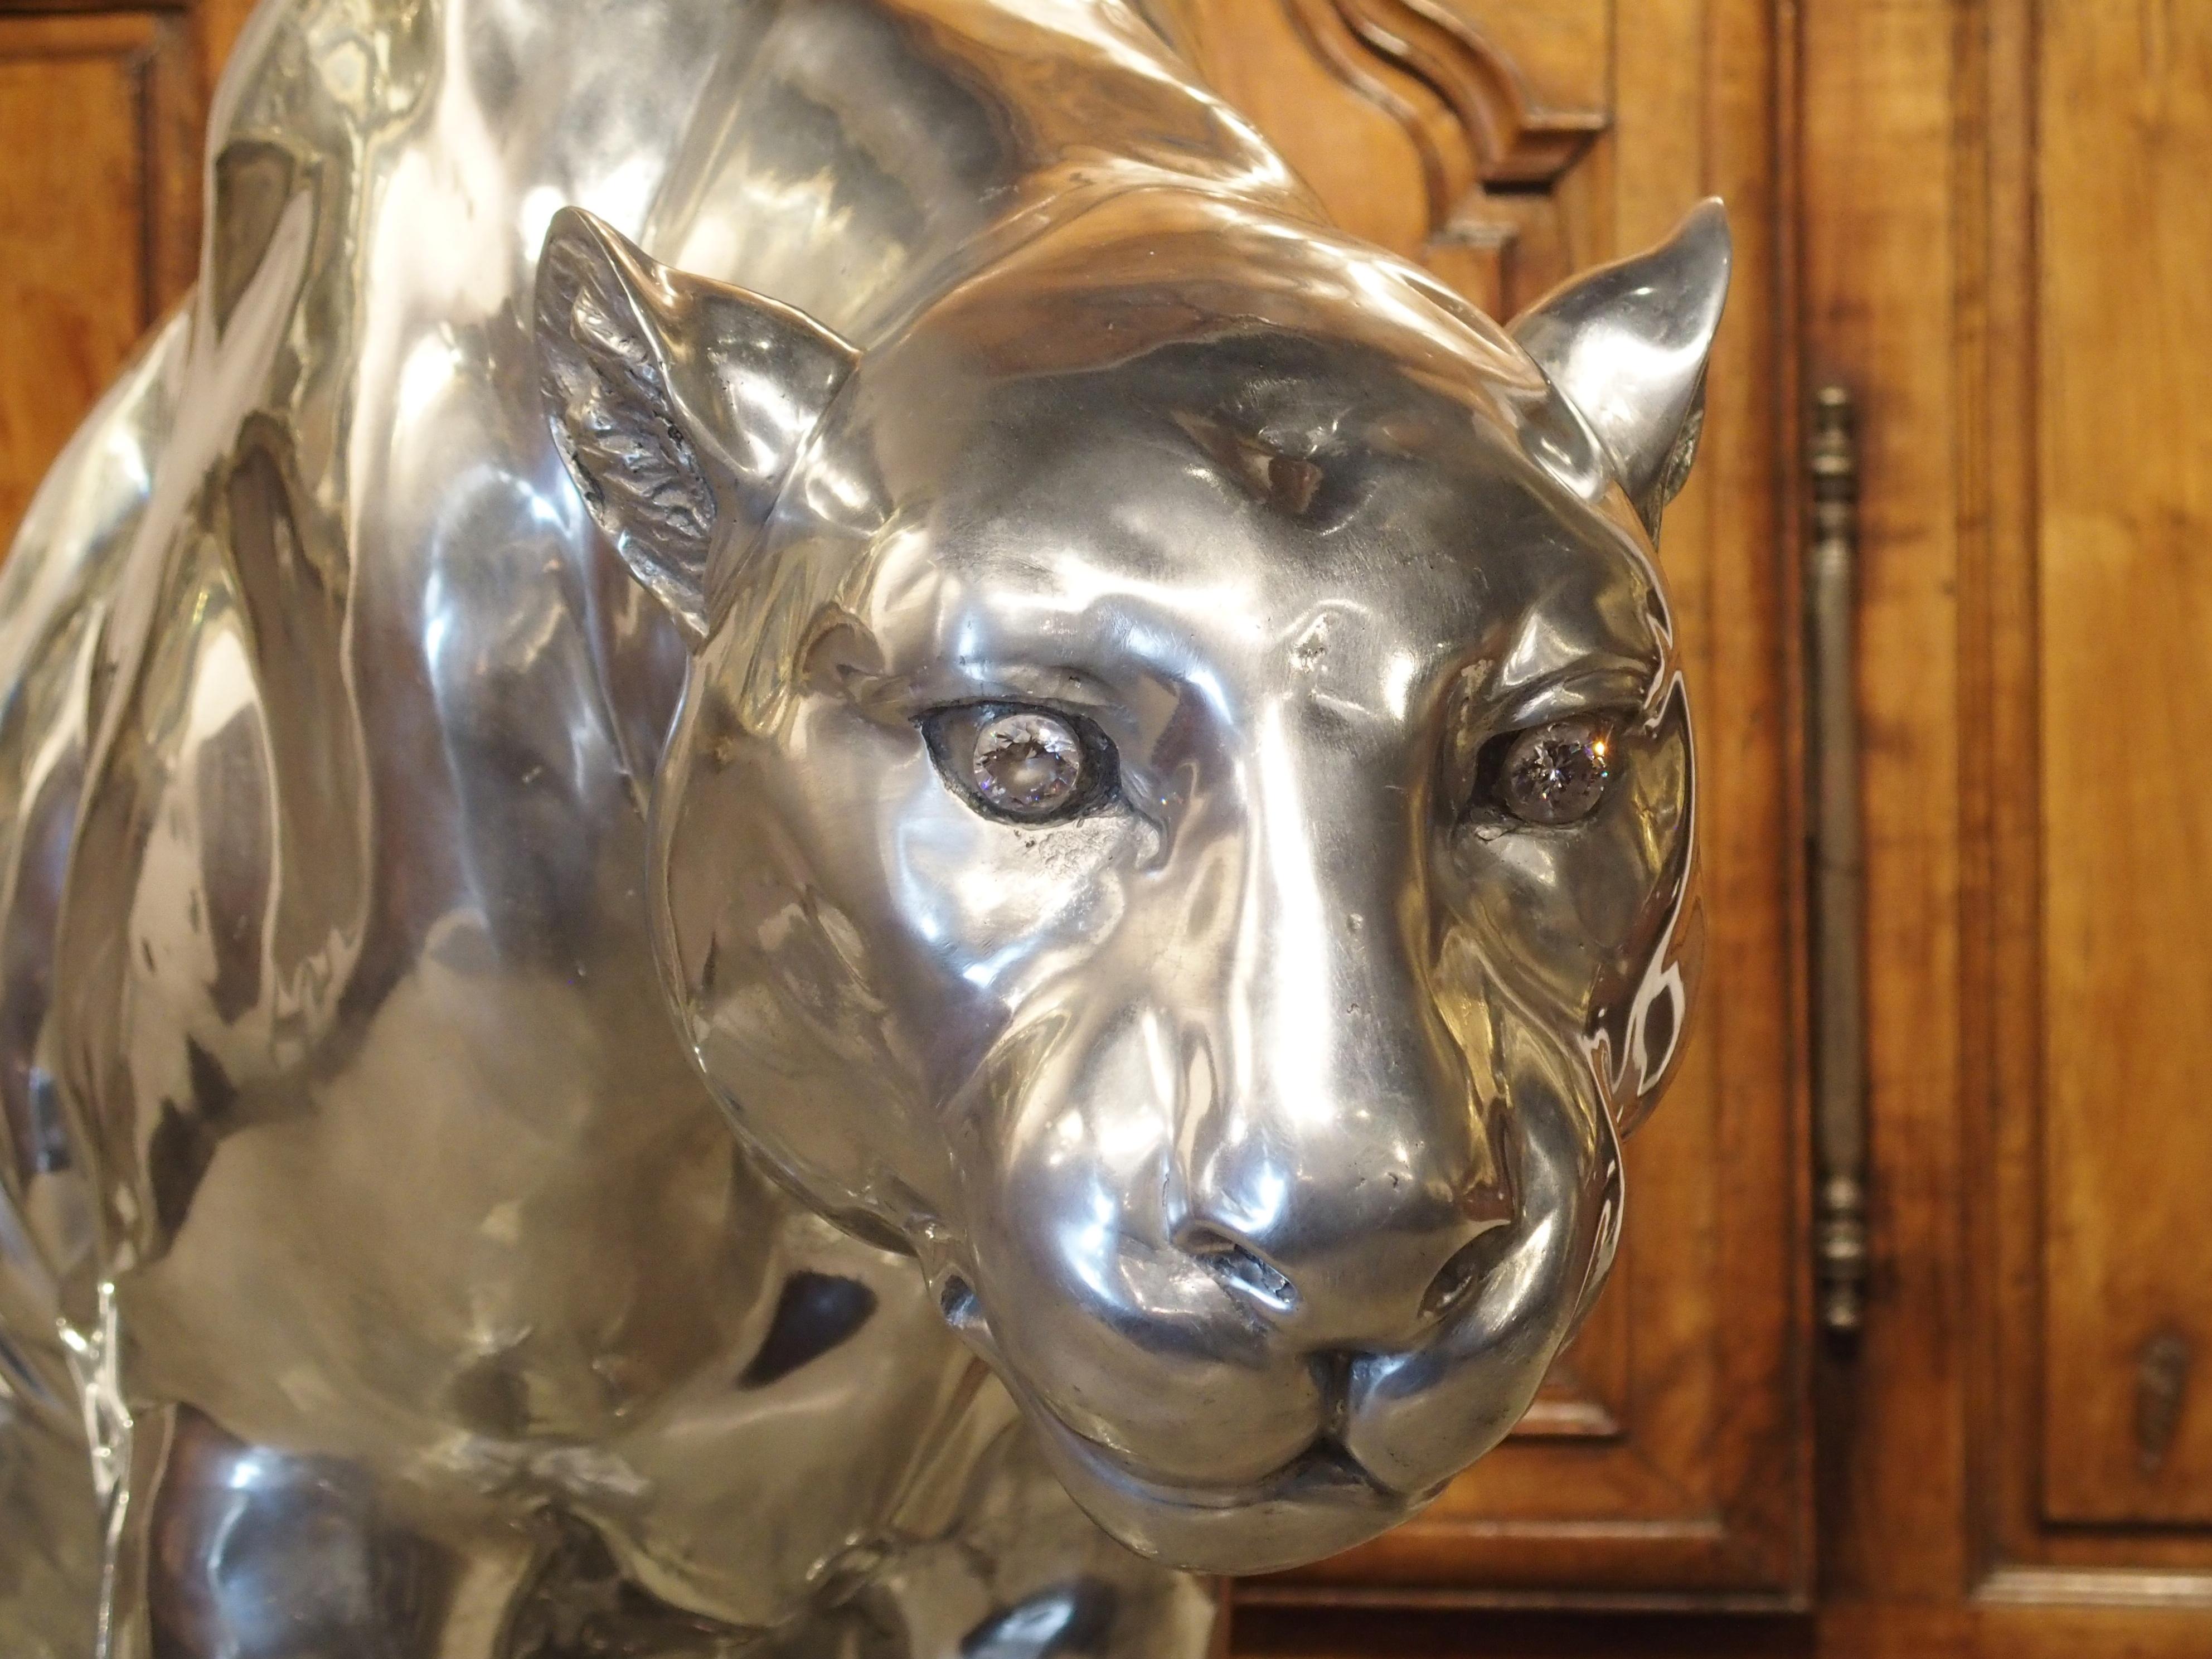 This stunning panther is by the famed French sculptor Christian Maas (b.1951). At 33.5 inches high (to the shoulder), this contemporary masterpiece of sculpture is life-sized, and has perfect proportion. The panther has been cast from aluminum and